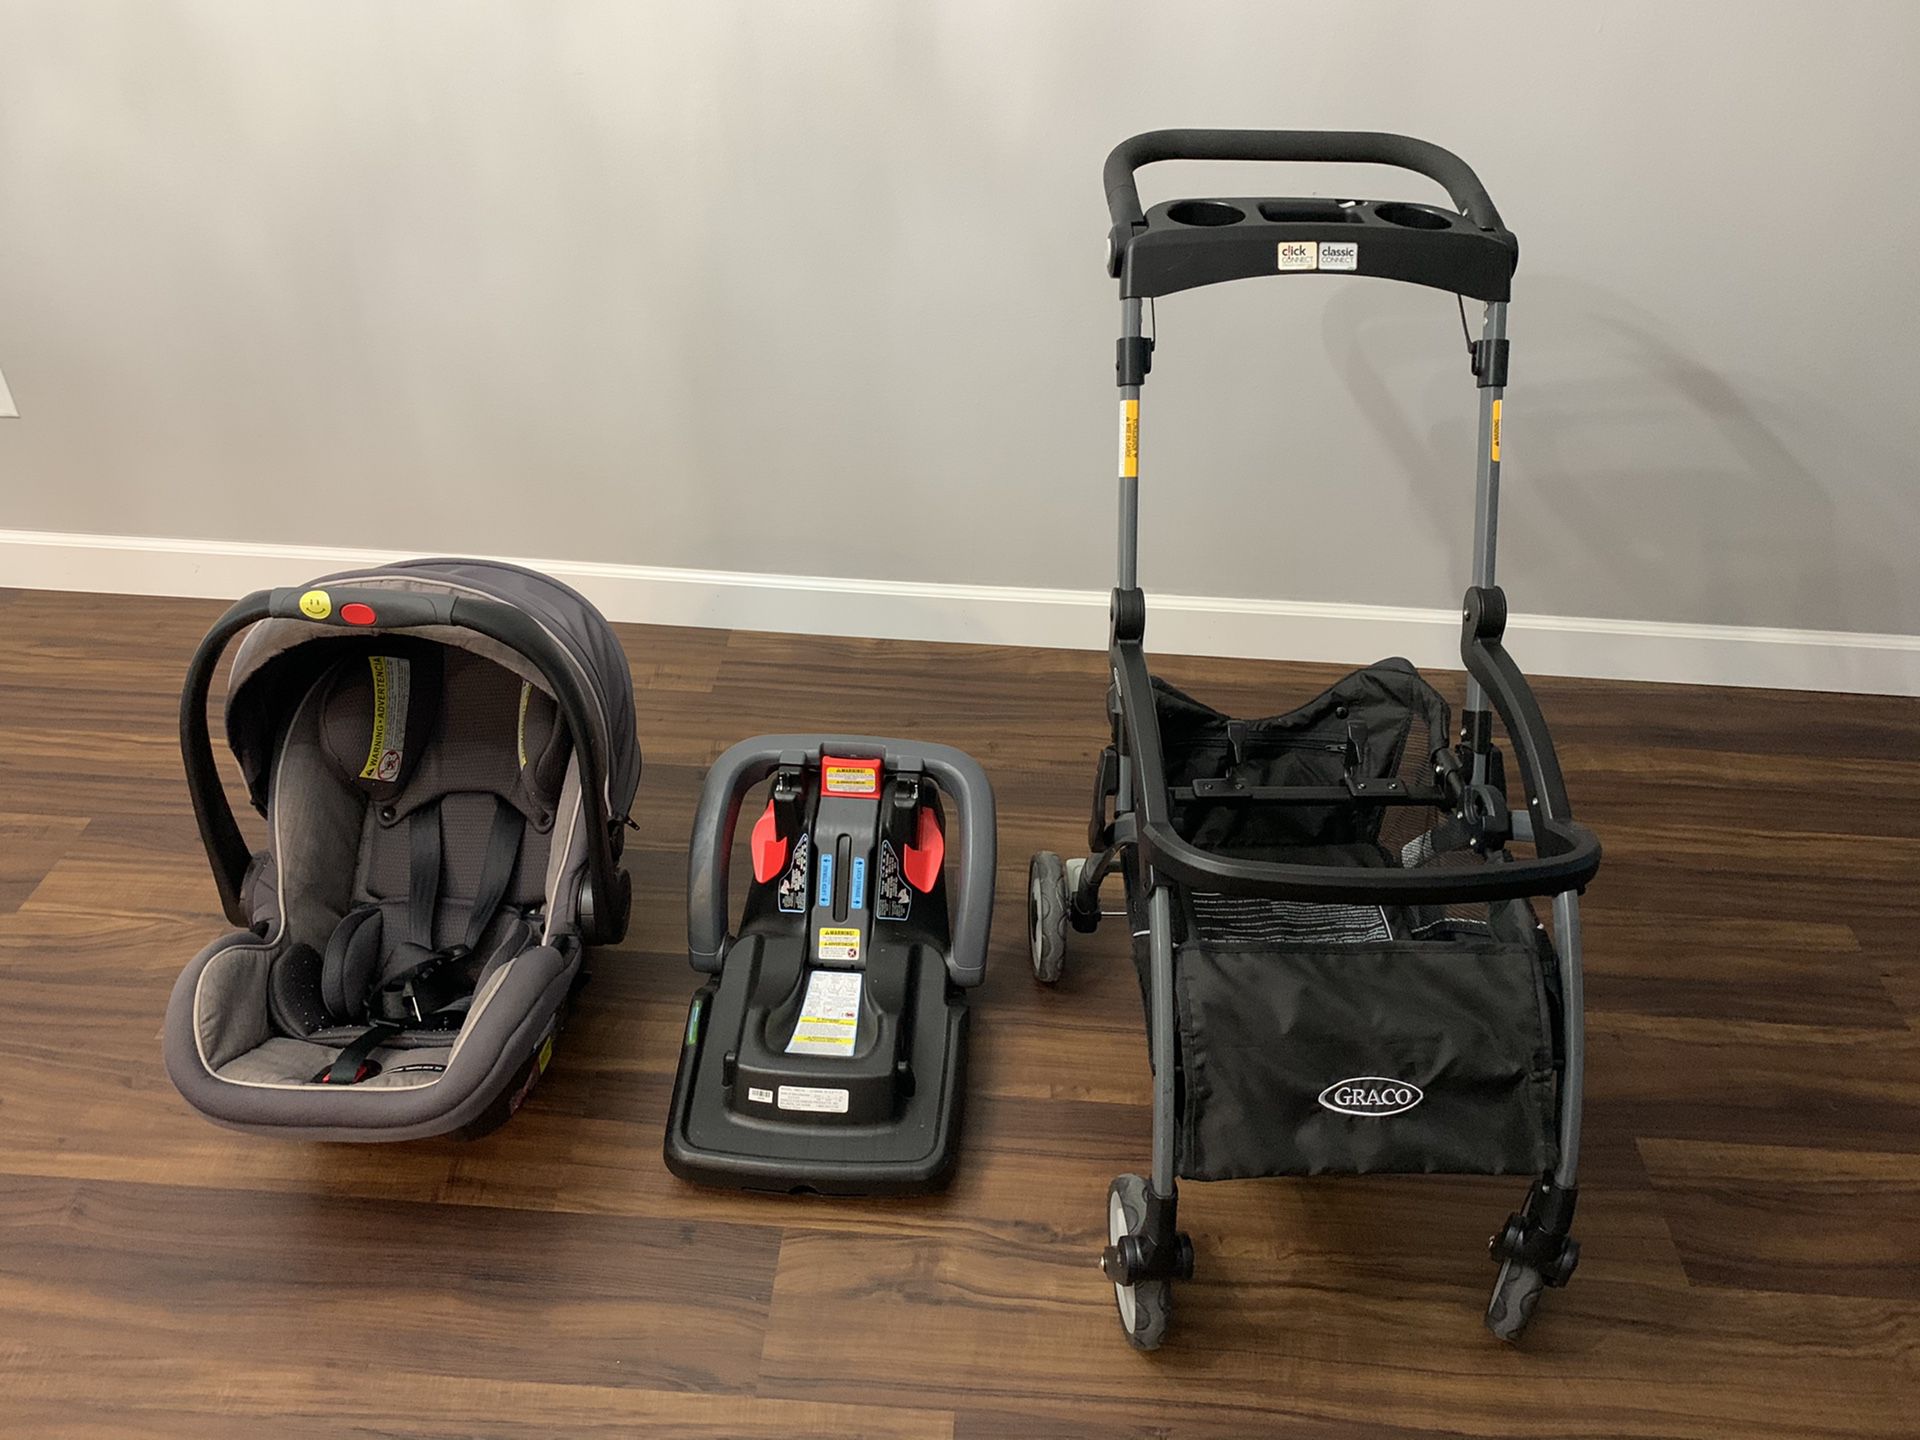 Graco carseat + base + carseat carrier